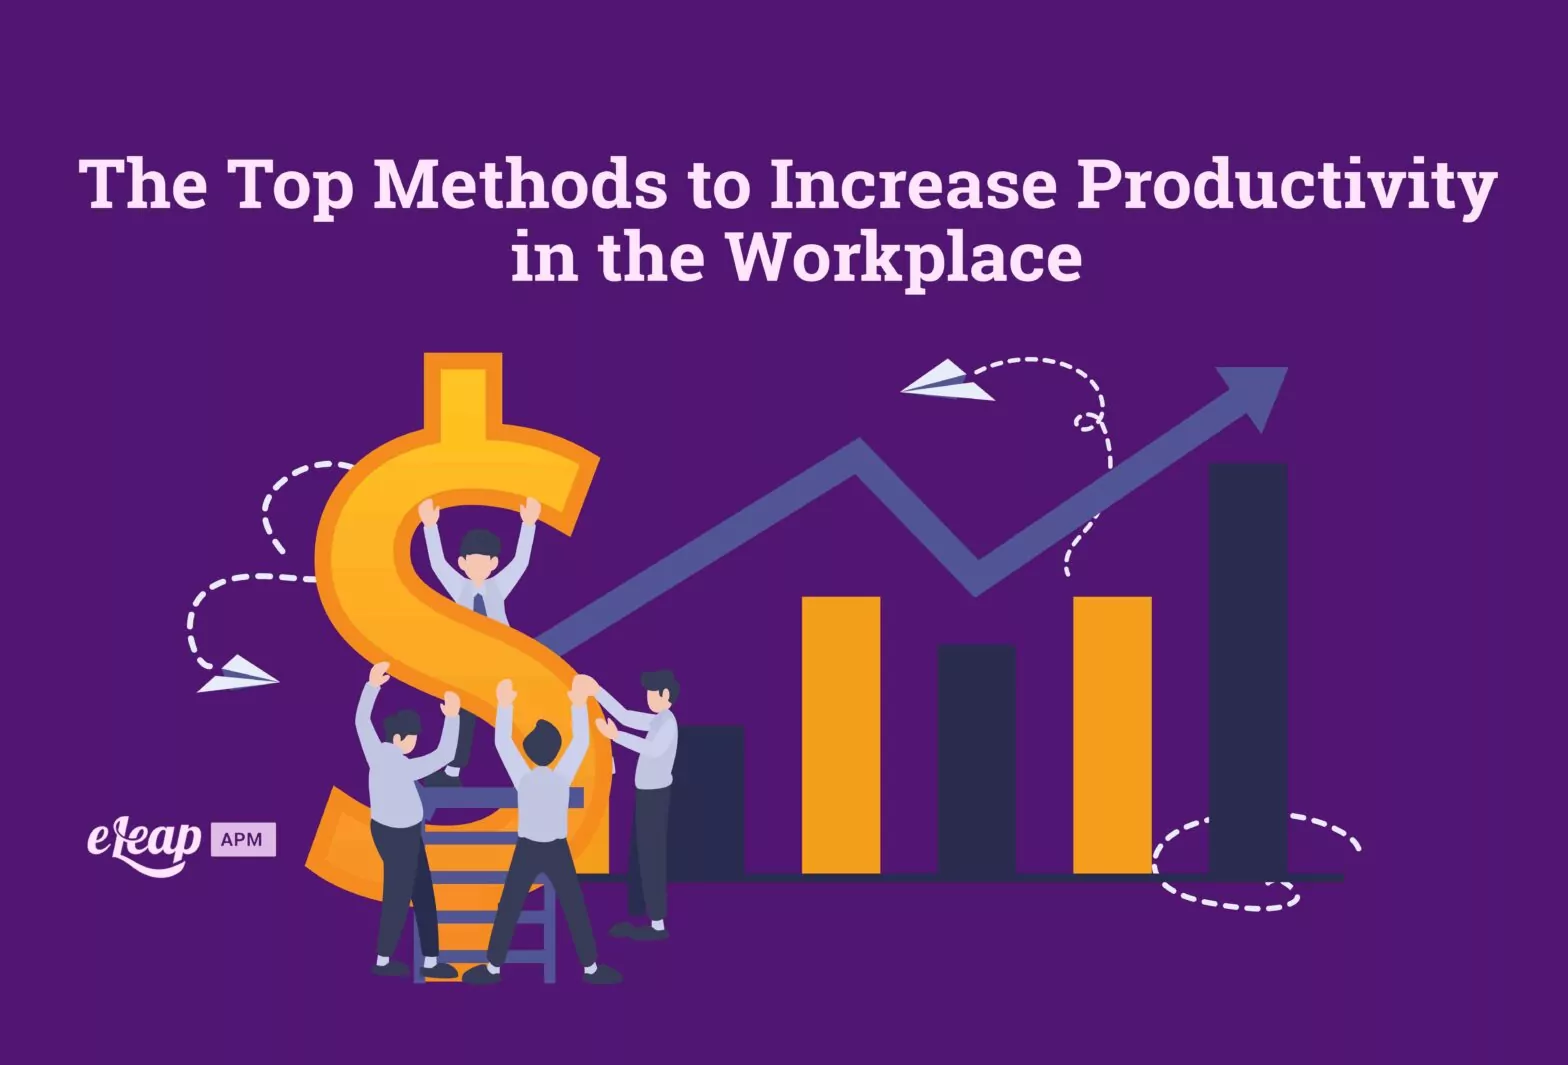 The Top Methods to Increase Productivity in the Workplace